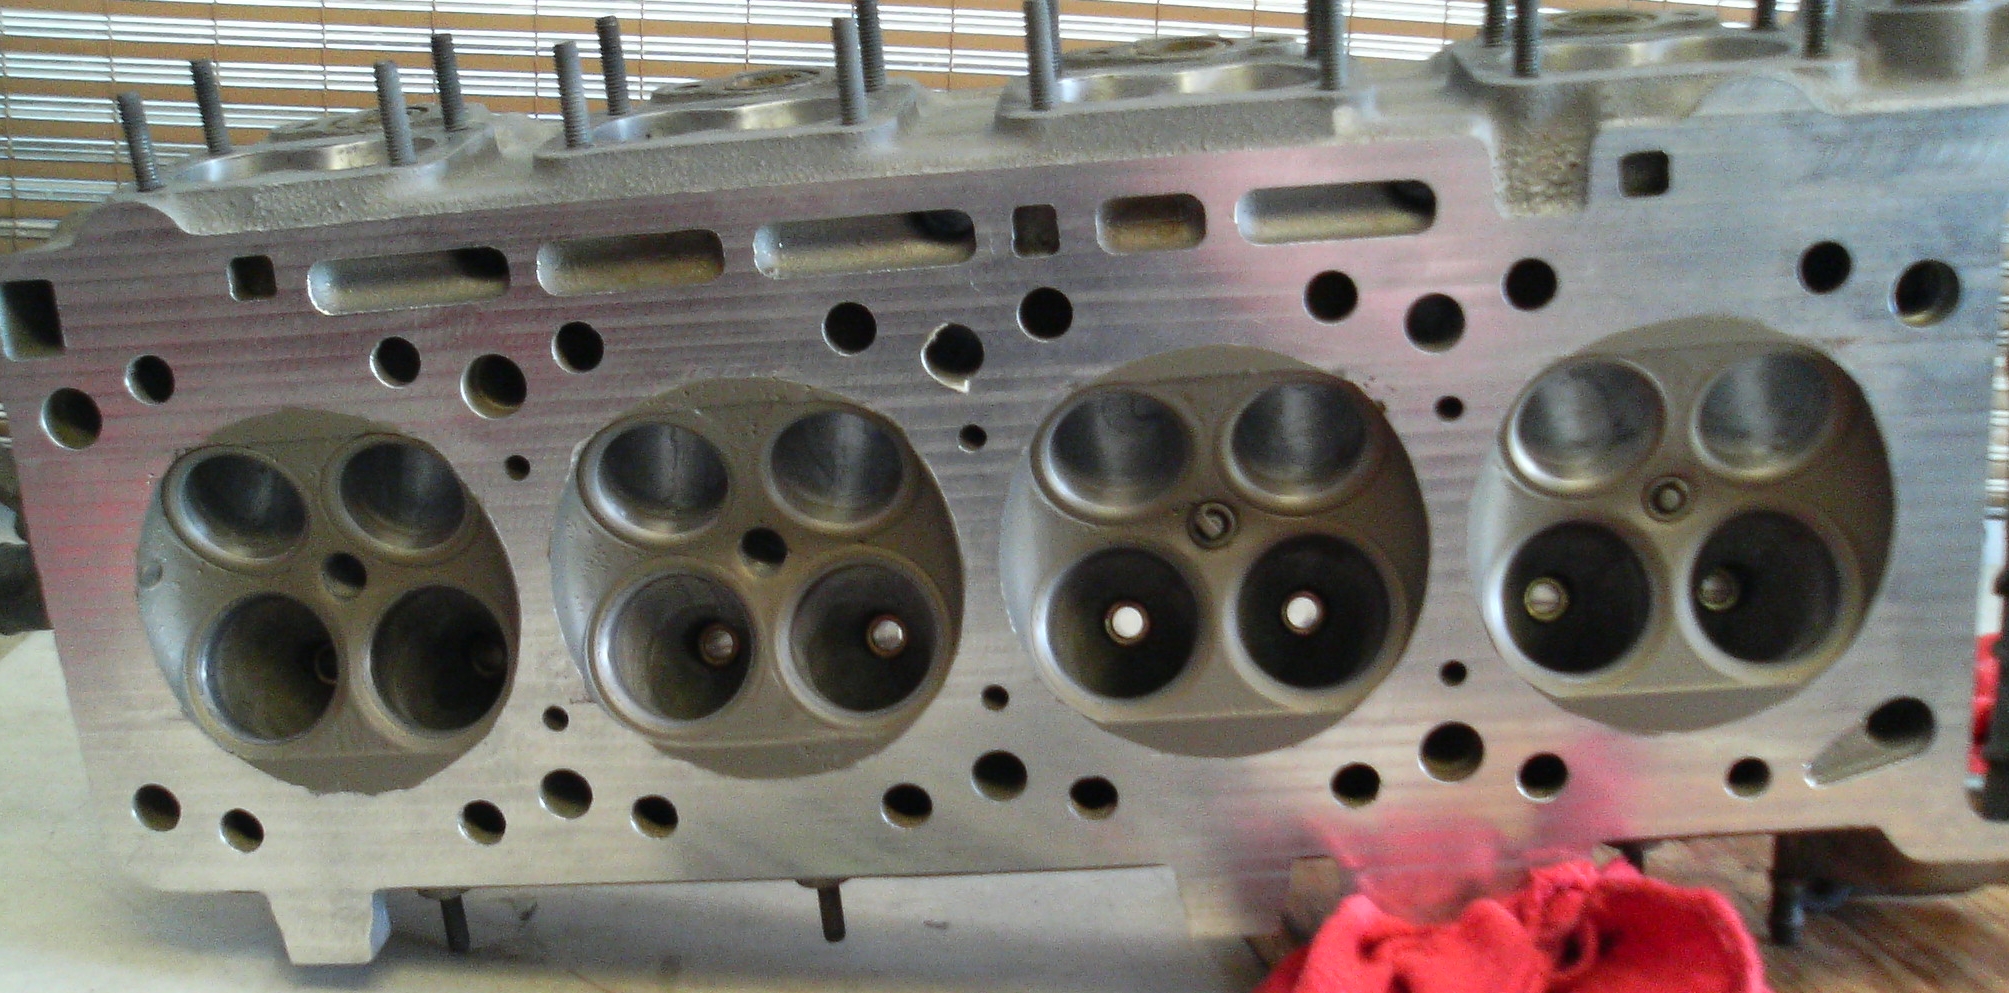 BMW M3 engine project thermal barrier coated